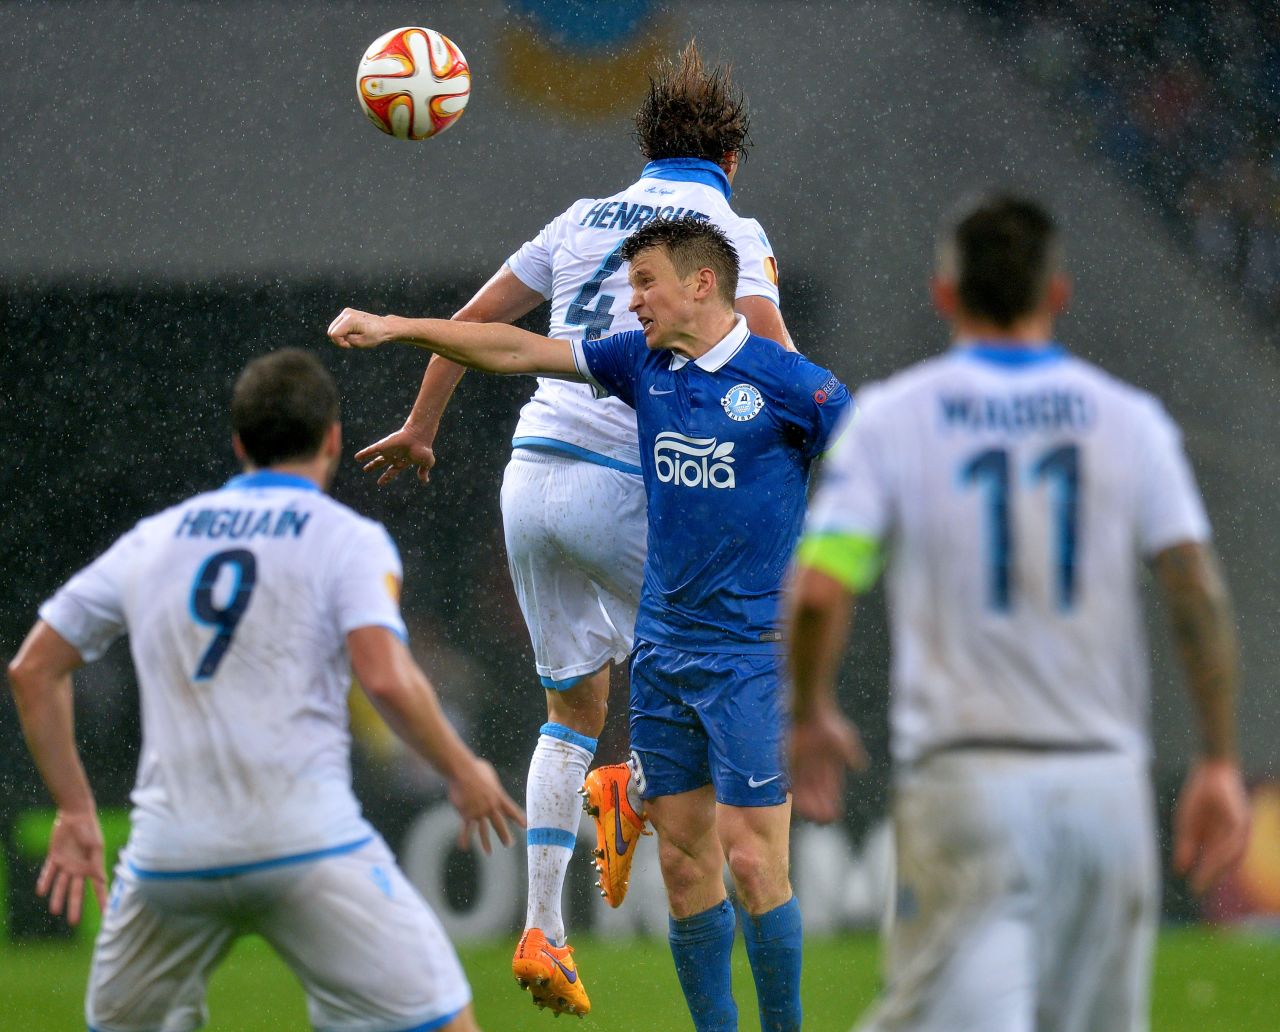 Led by Ruslan Rotan, its captain, Dnipro overcame the challenge of Italian giant Napoli in the semifinals. A 1-1 draw in Naples was followed by a 1-0 win in the second leg.